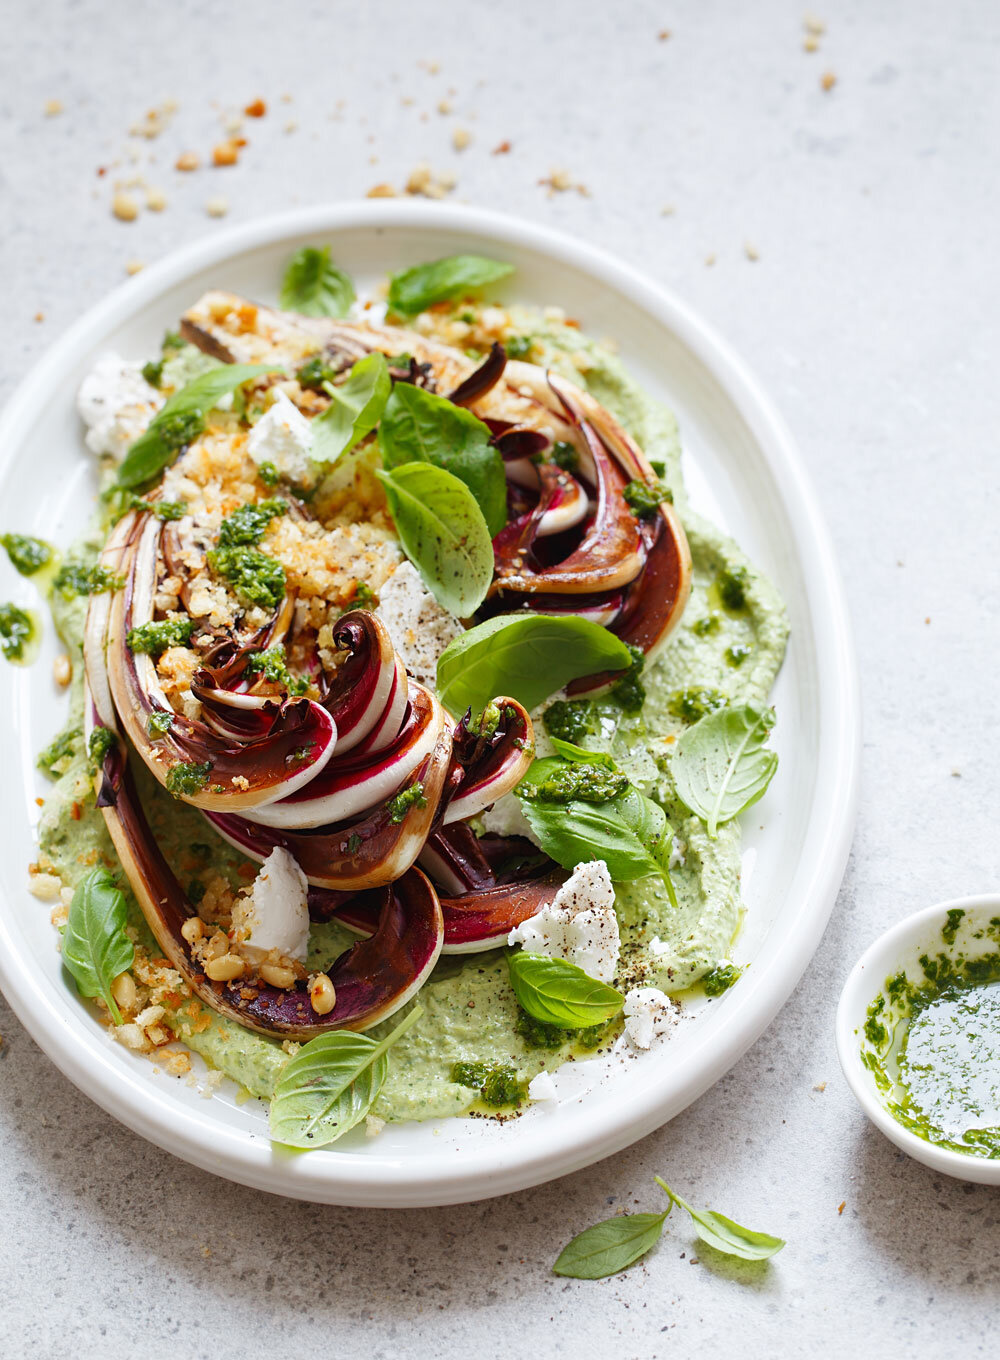 Grilled radicchio salad with creamy pesto, basil, goat cheese, and toasted pine nuts, served by Joel Catering, New Orleans' leading catering service